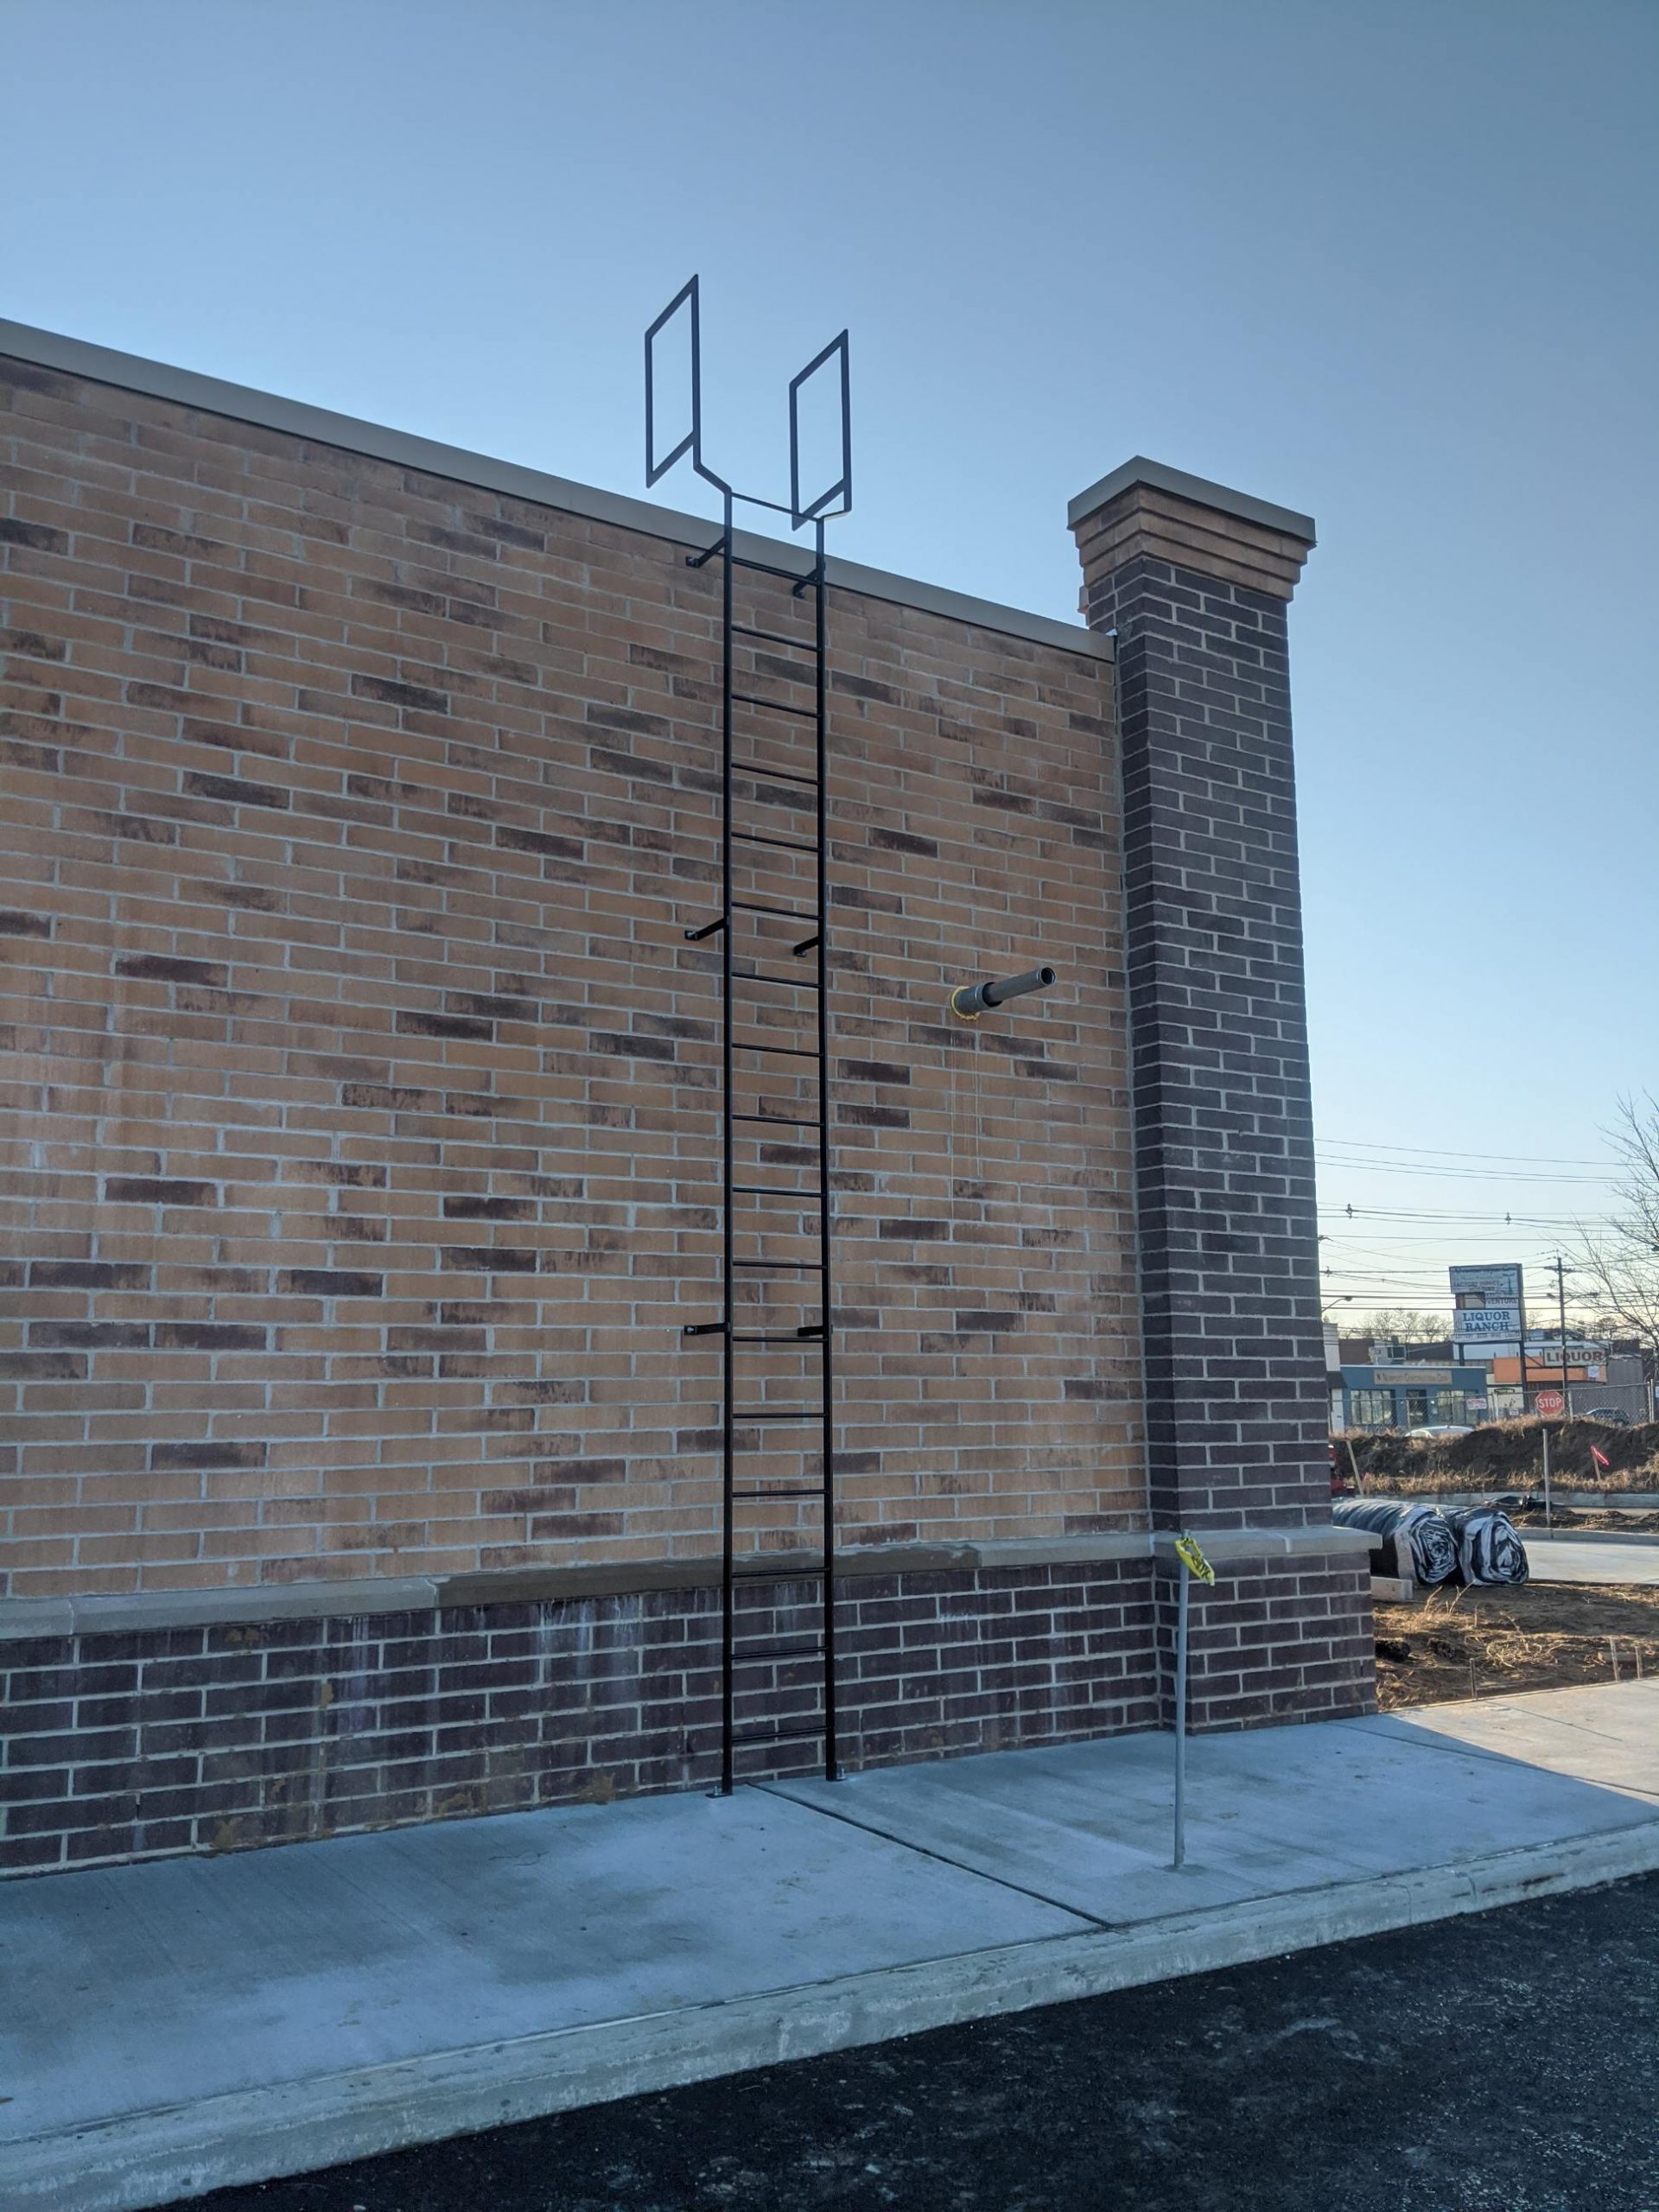 Roof Access Ladder on One Story Commercial Property